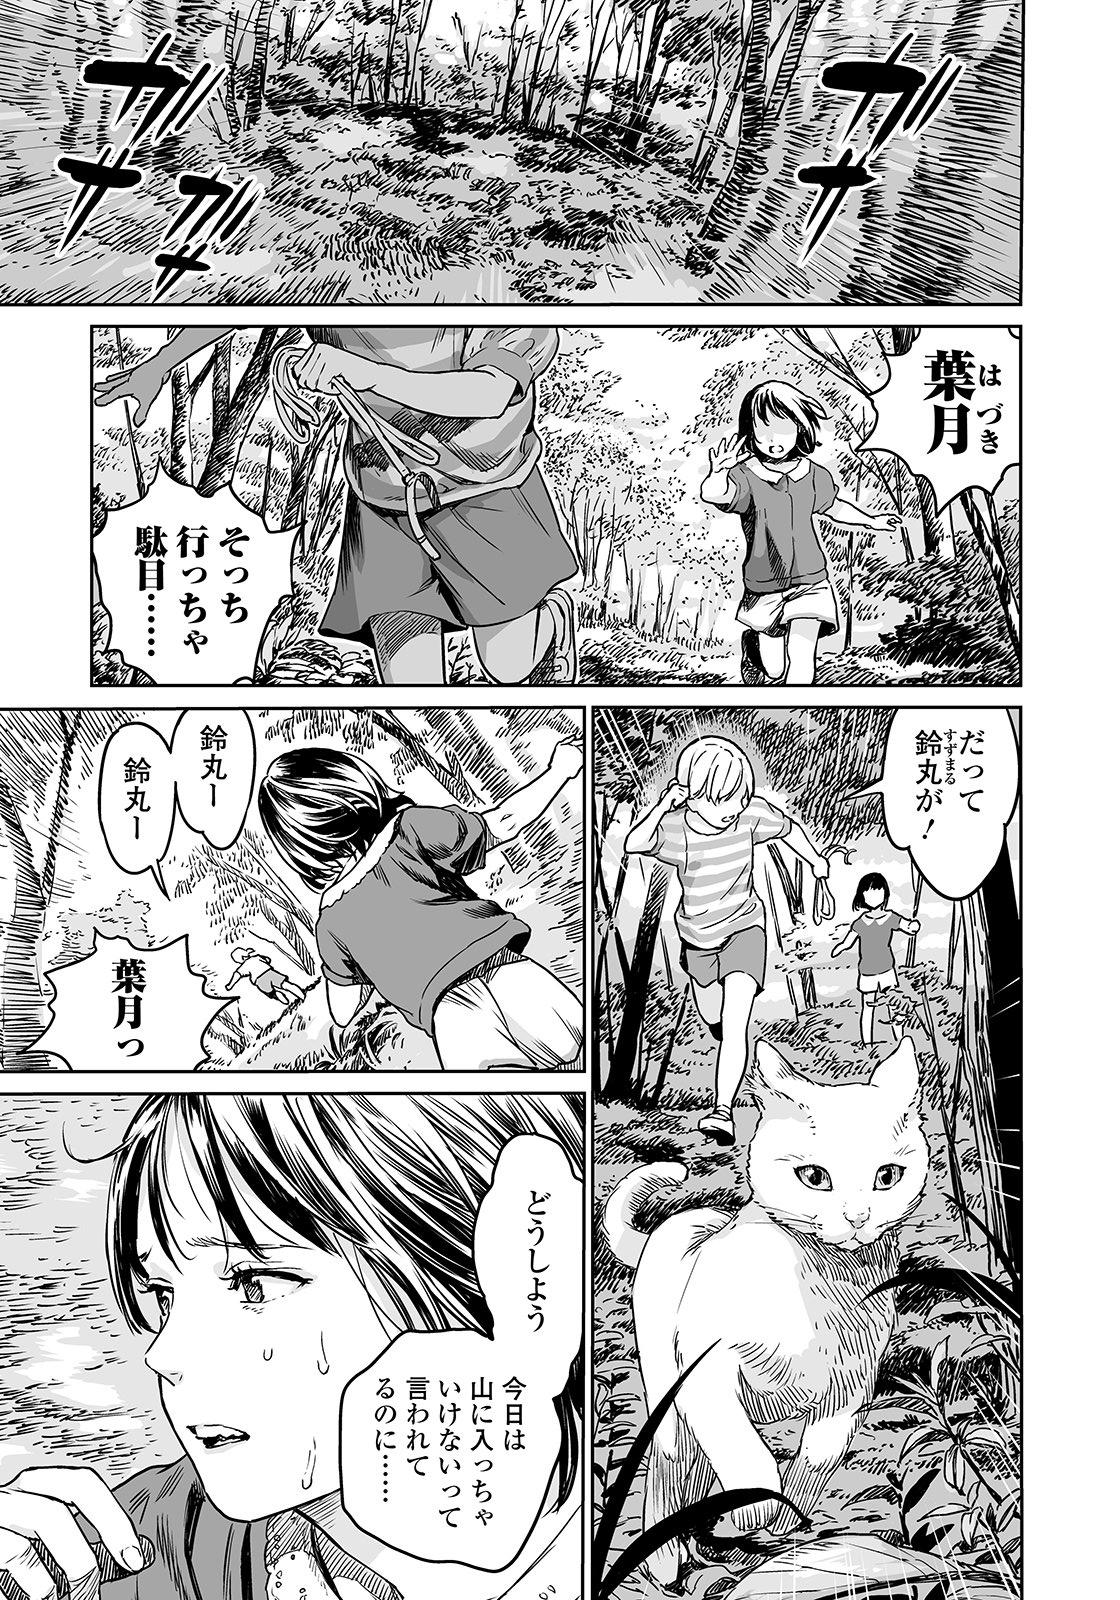 Porra Oogetsuhime no Yama Trans - Page 1